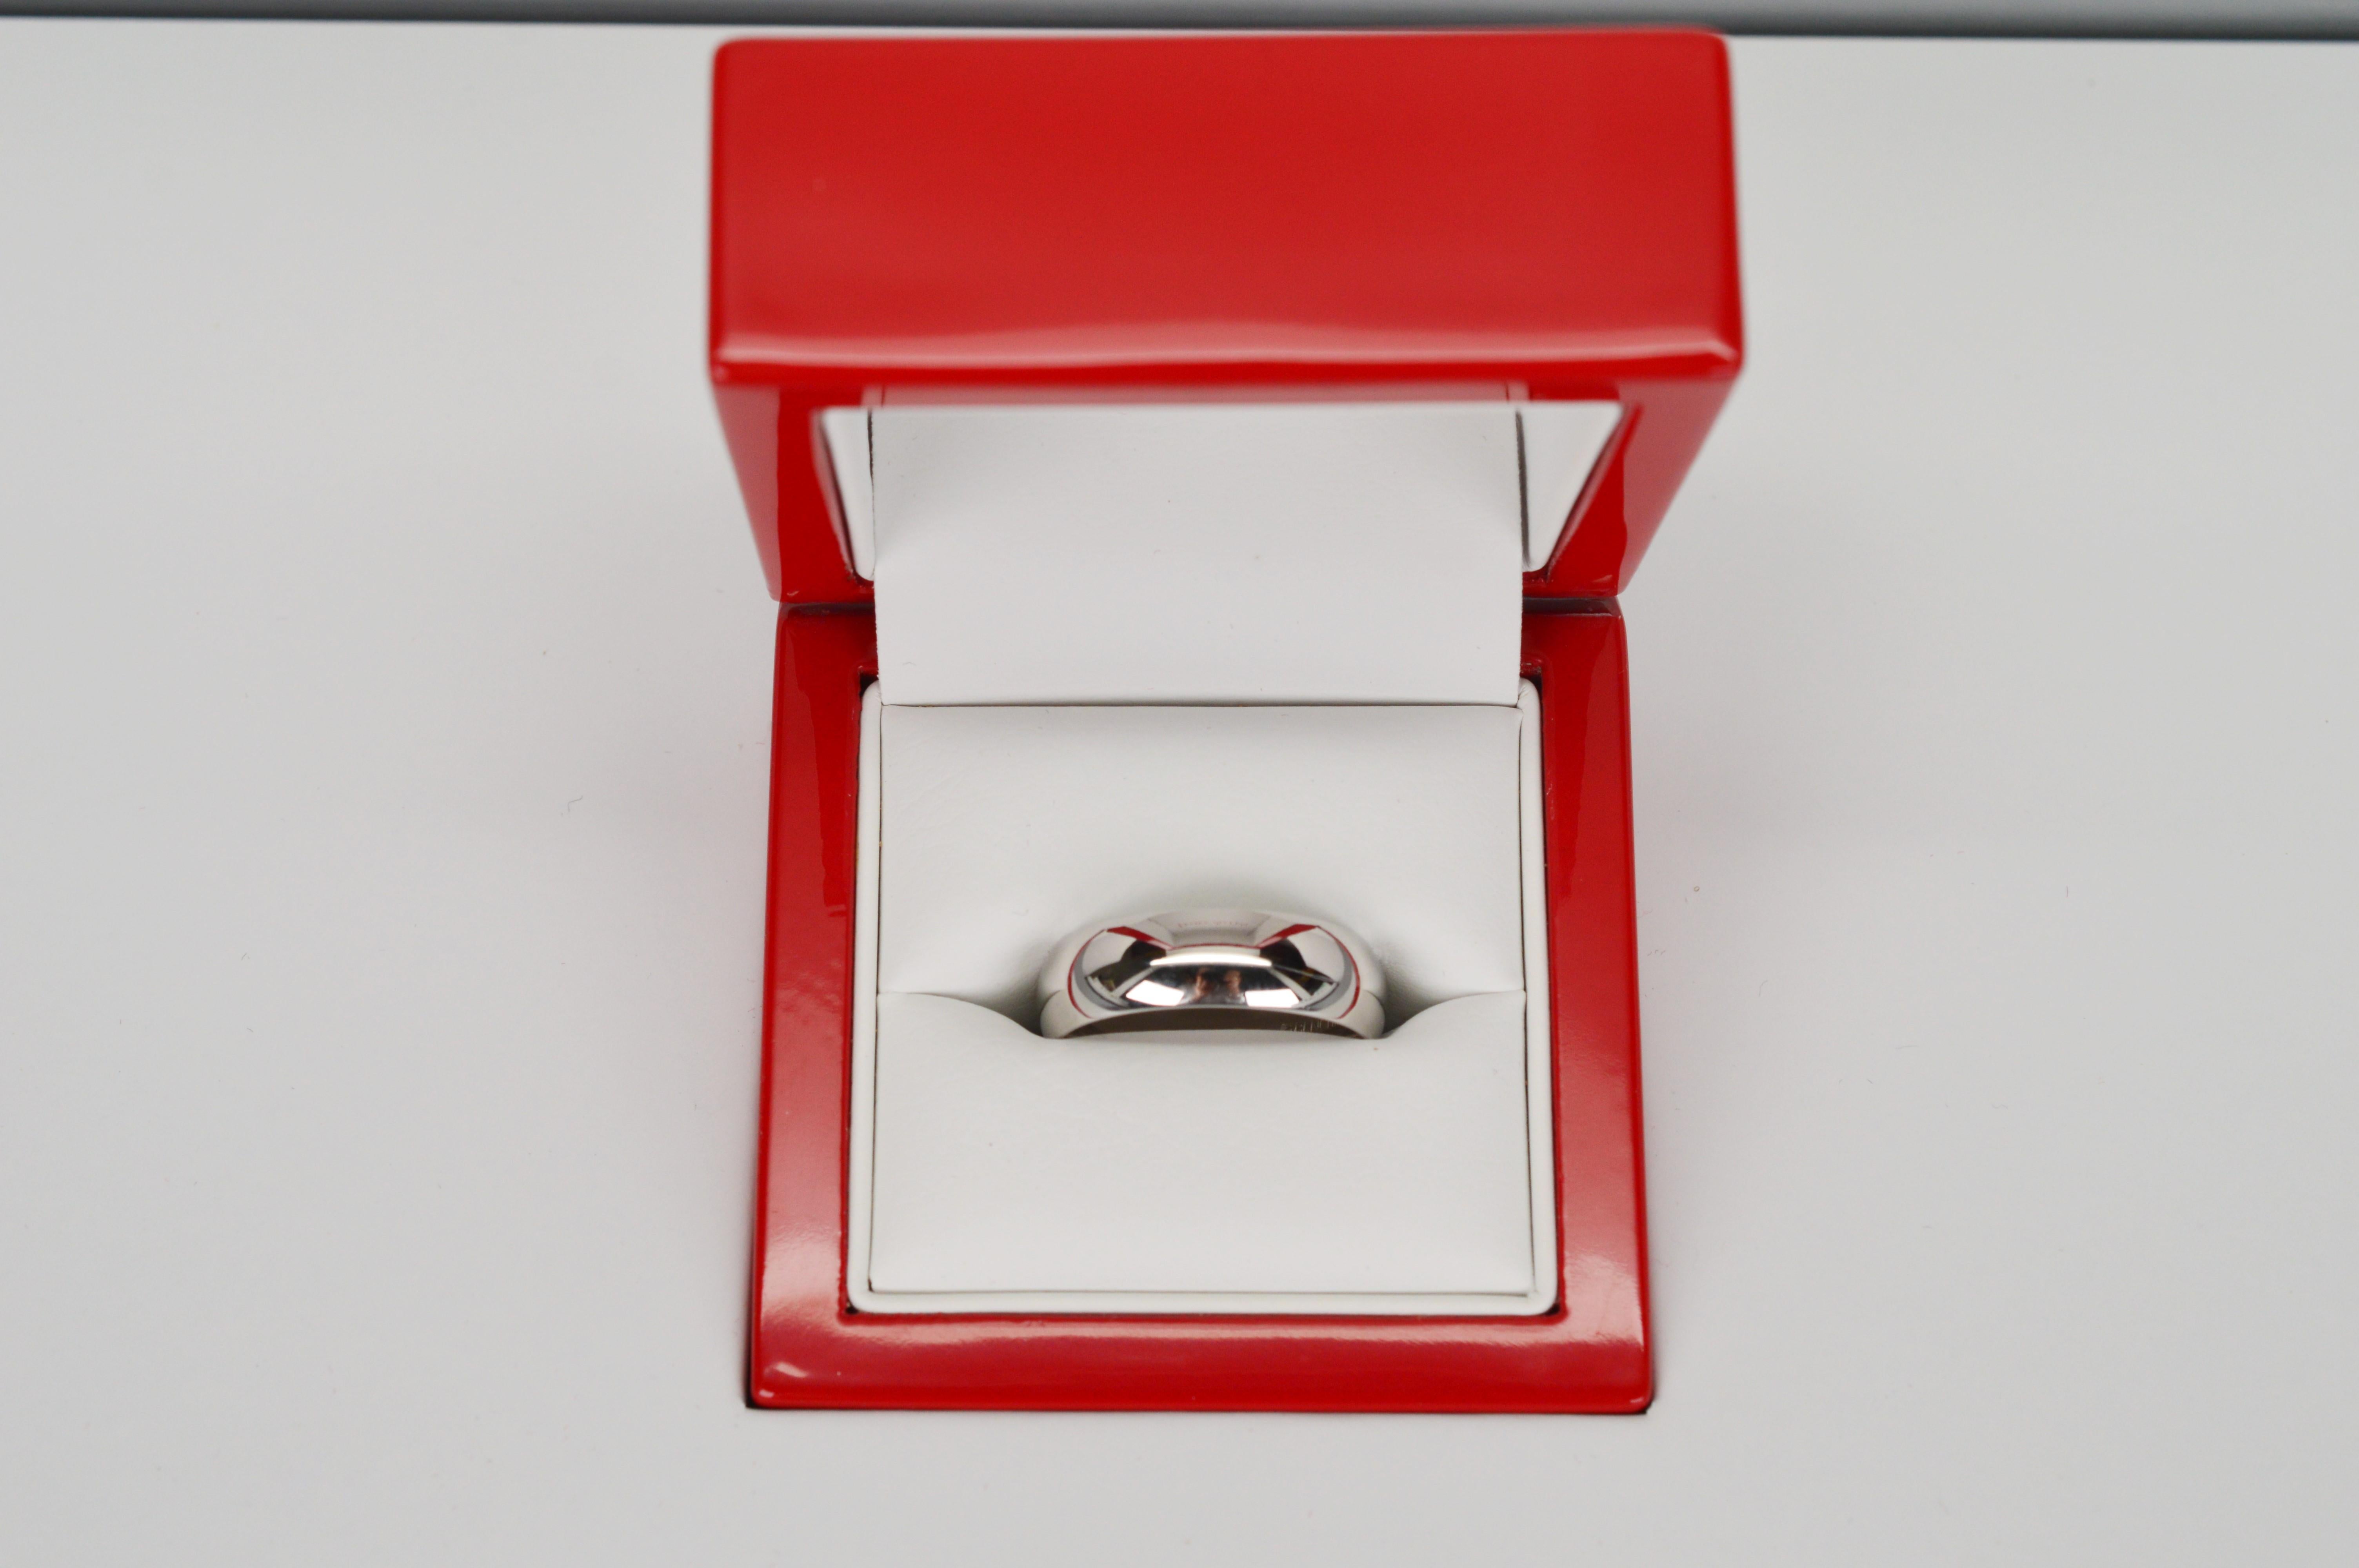 A classic band just for the Groom in .950 Platinum. Sleek with slightly domed contoured style for a modern fit, this new Benchmark Comfort Fit  Men's Wedding Ring is ready say 